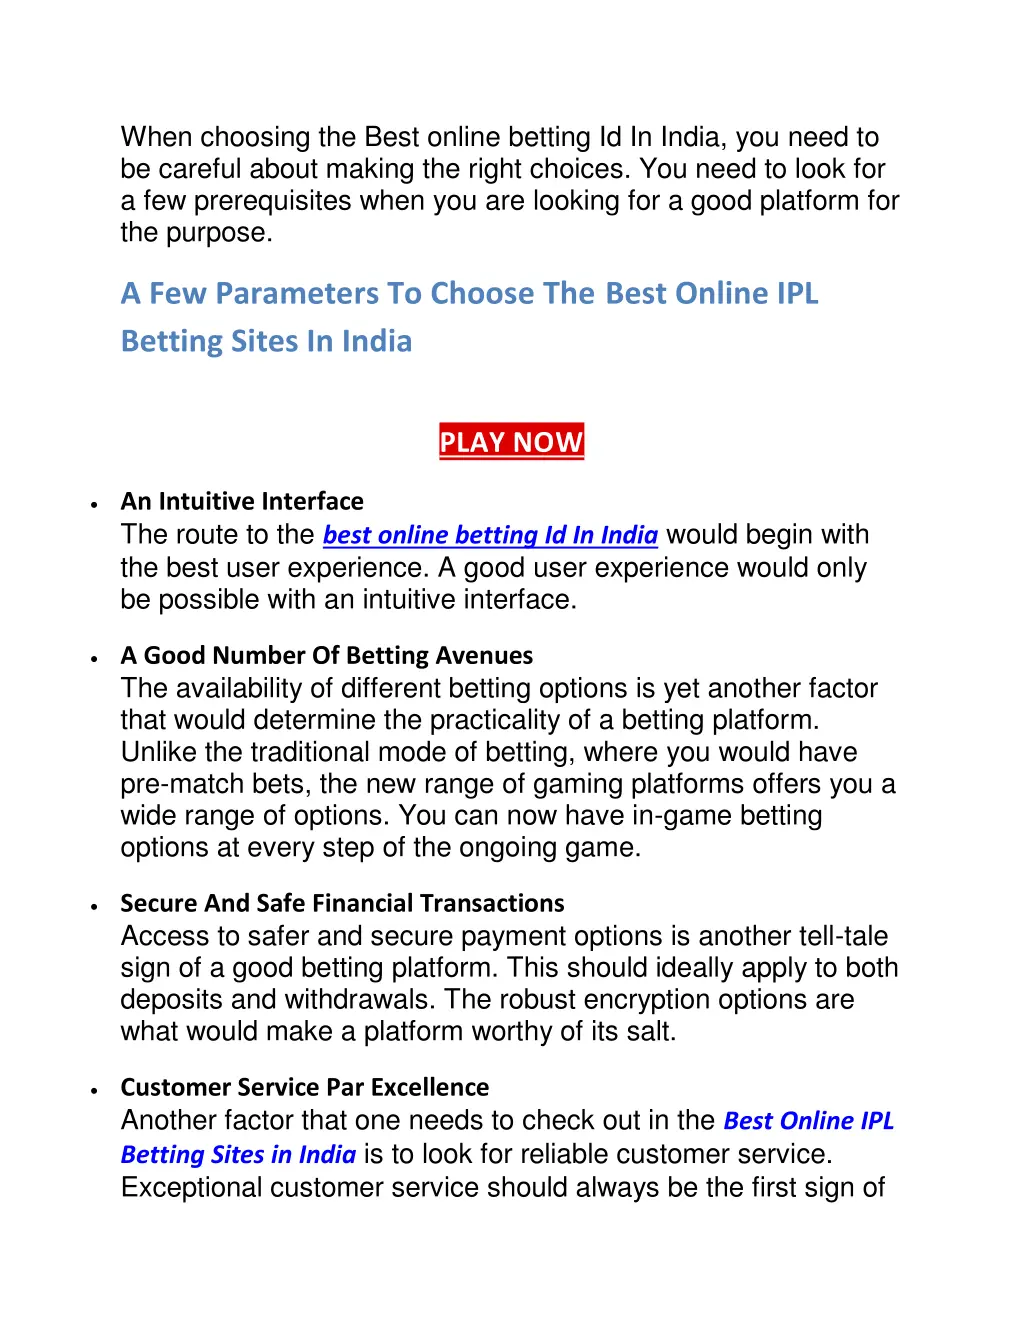 when choosing the best online betting id in india